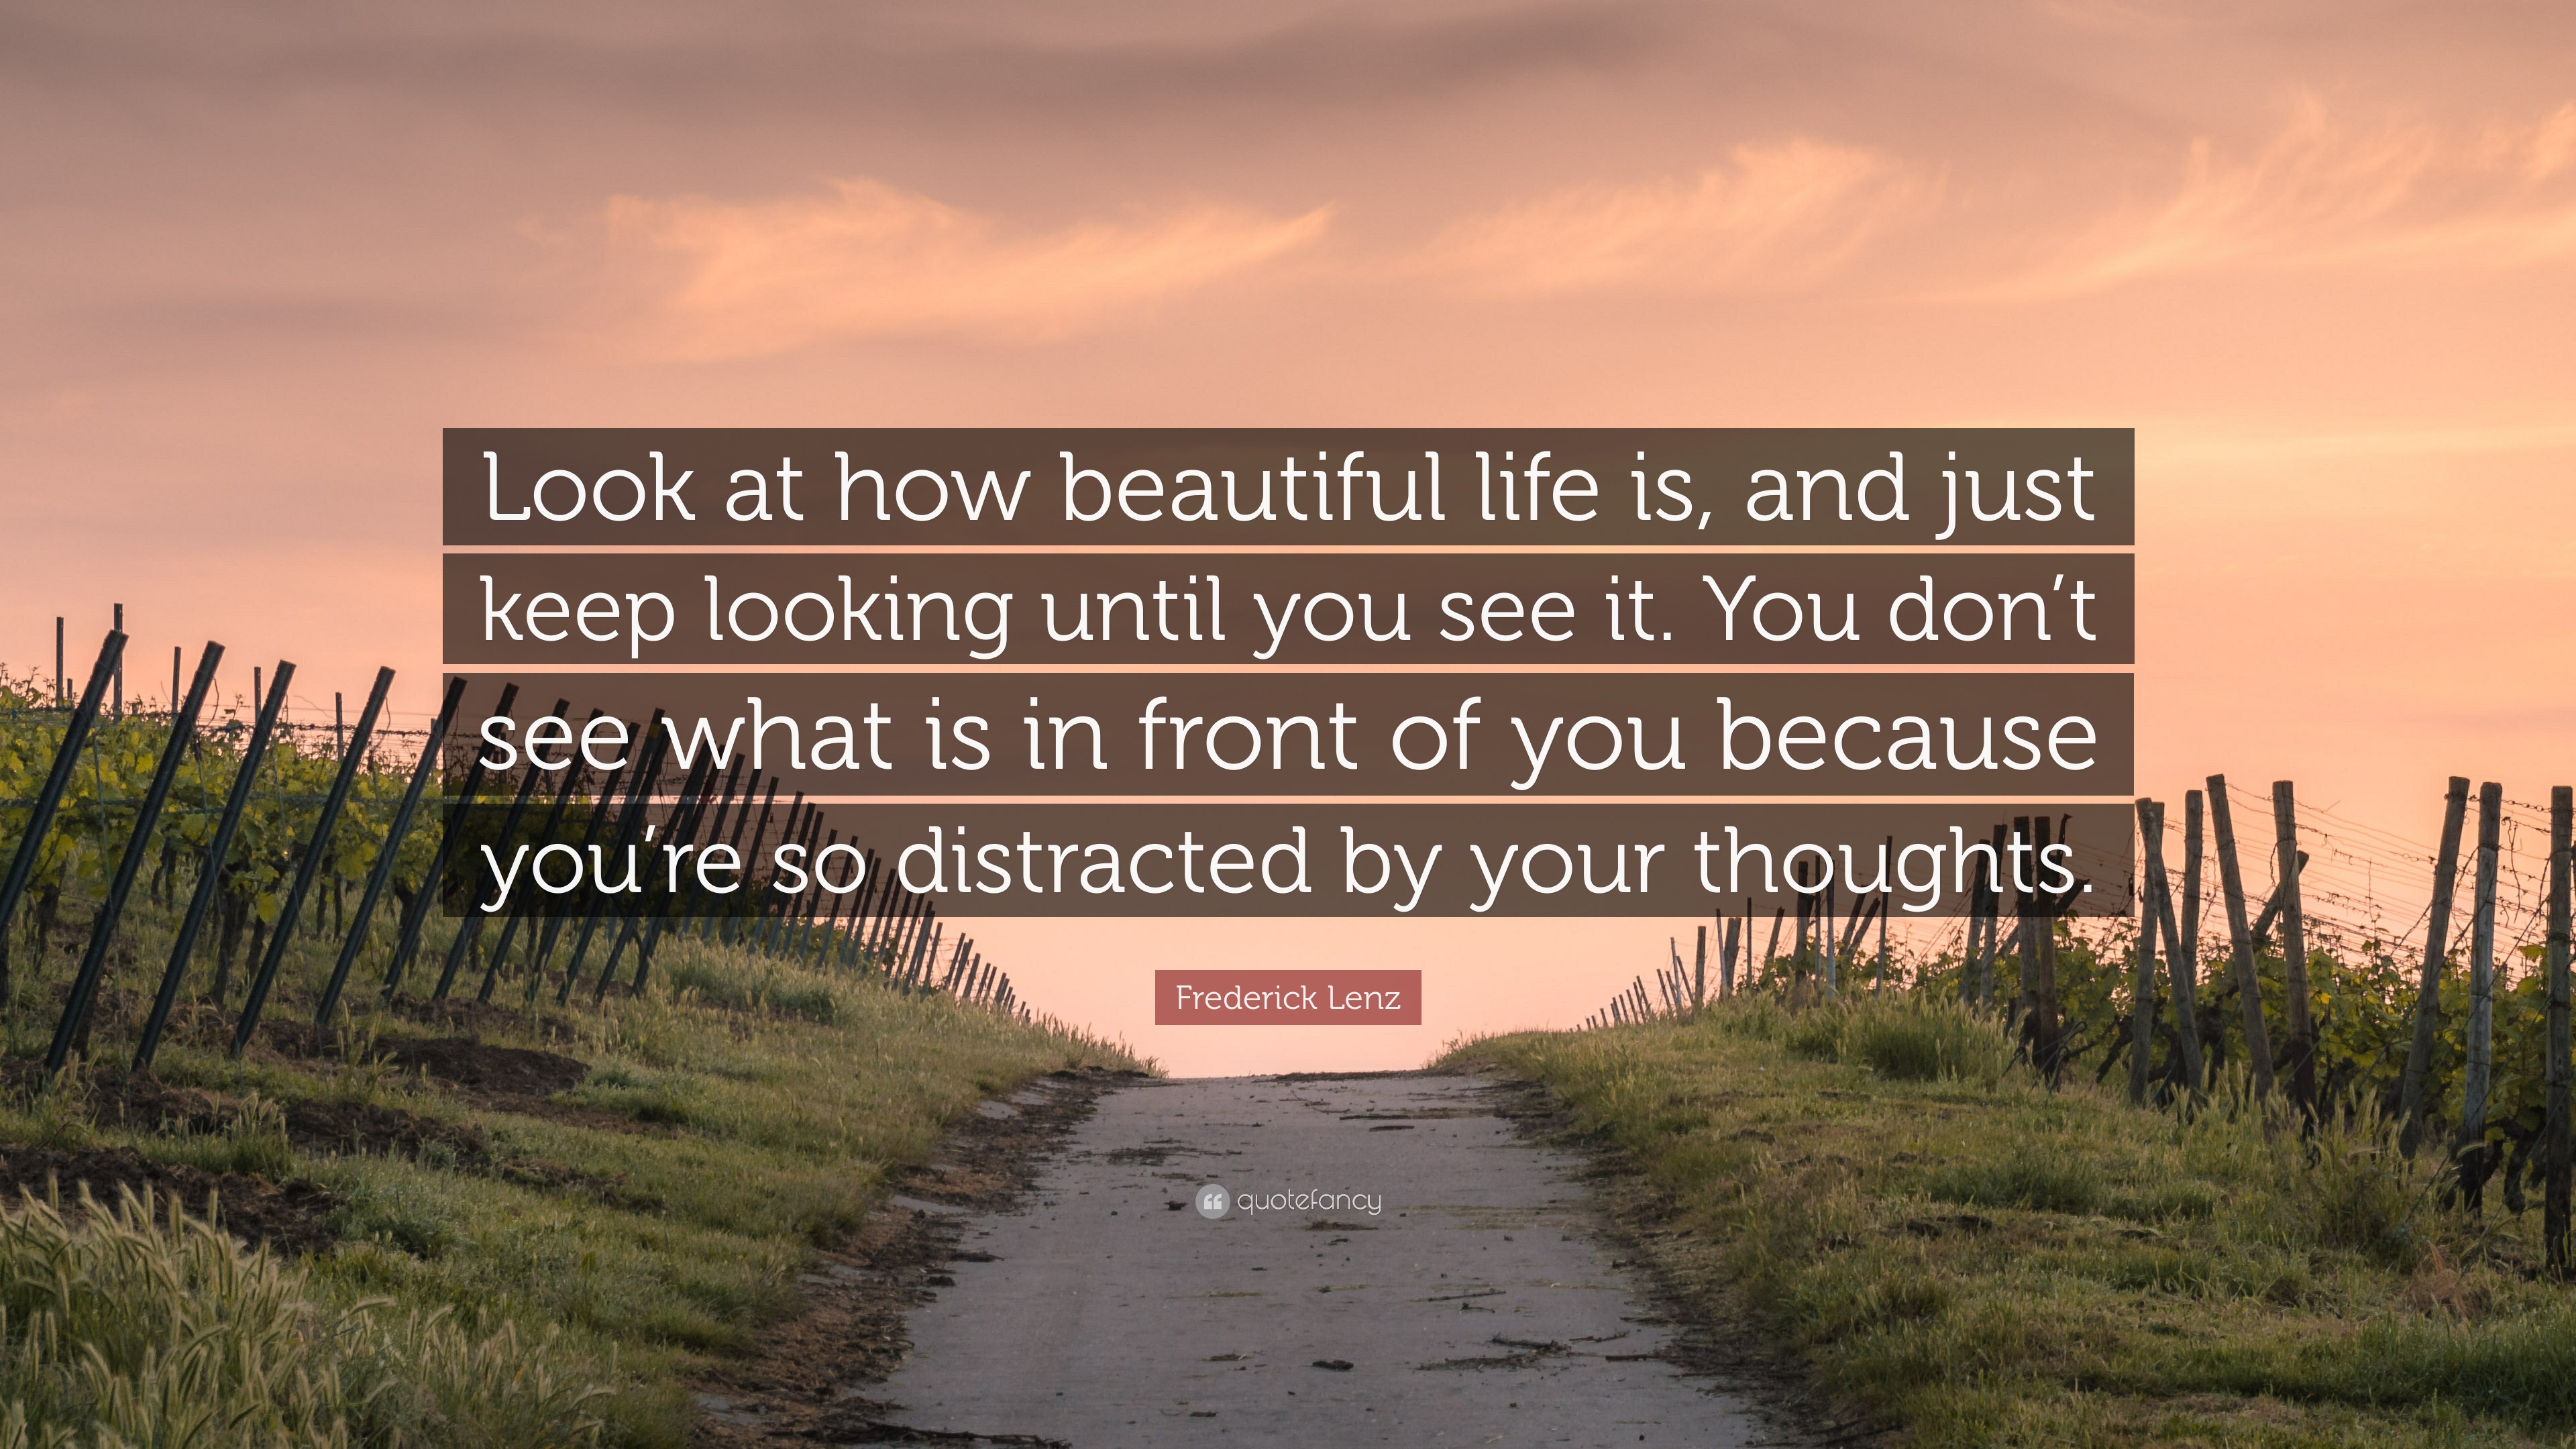 life is beautiful because of you quotes frederick lenz quote u201clook at how beautiful life is and just